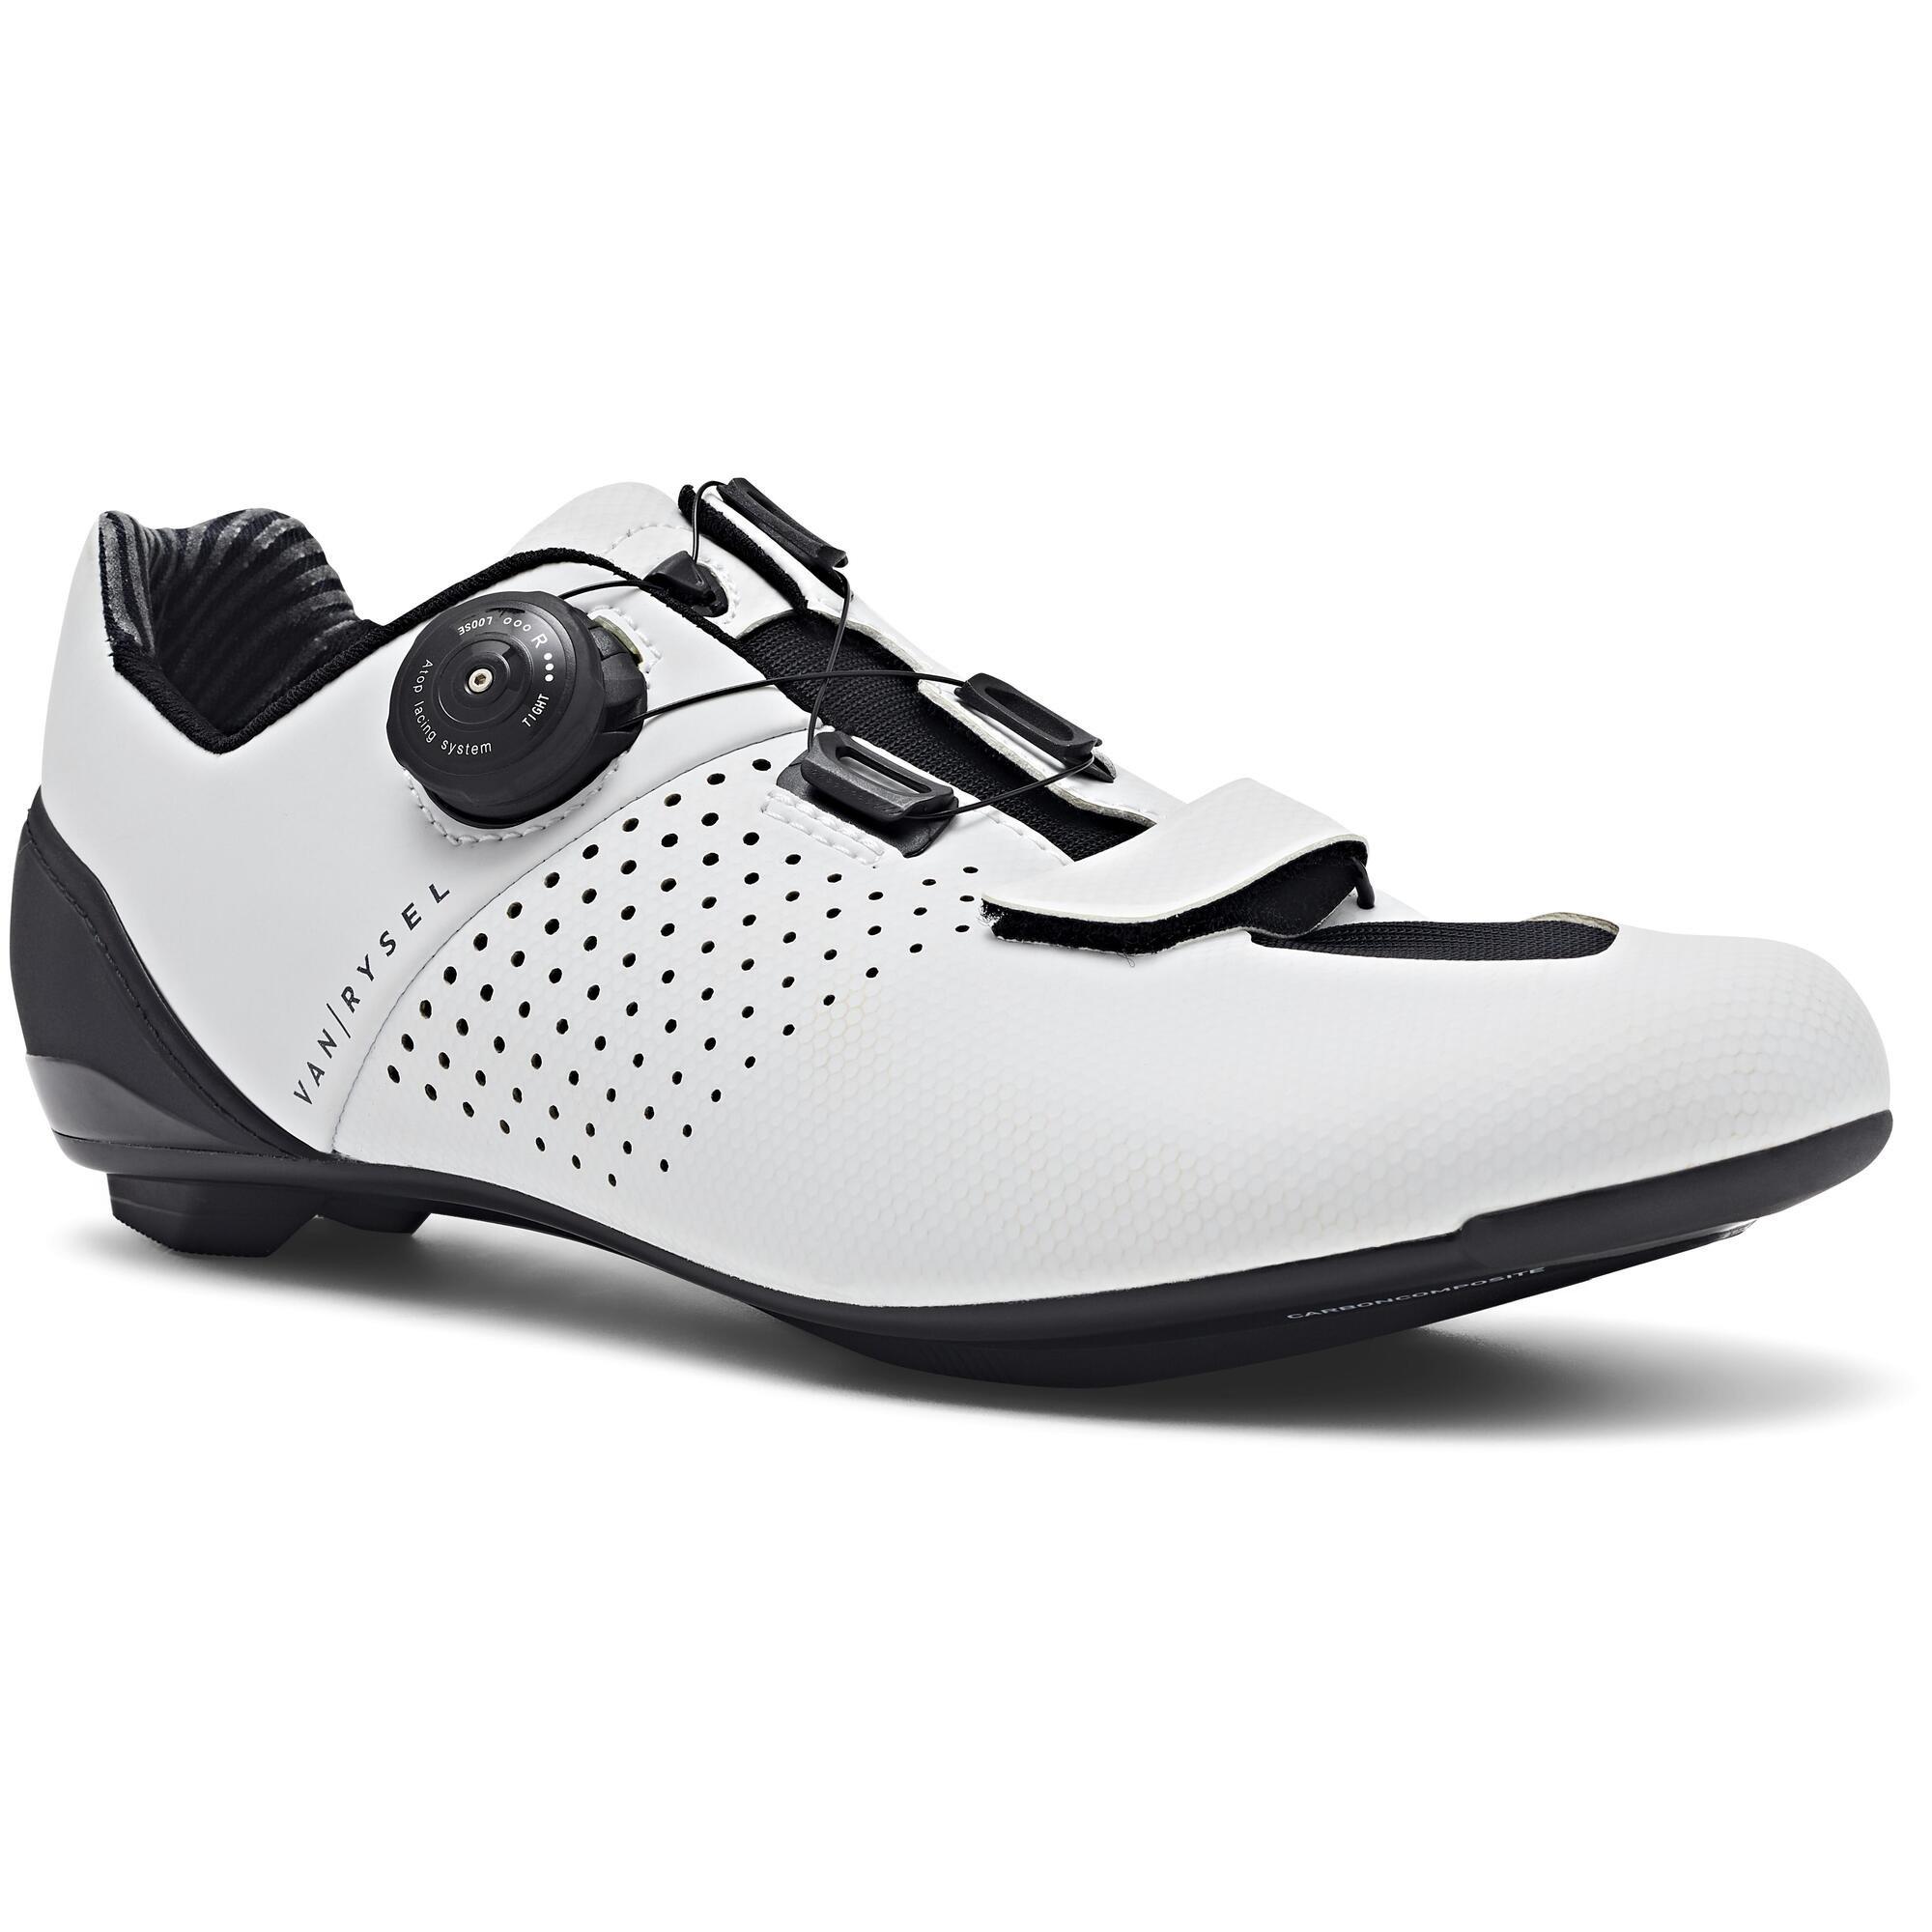 Спортивные кроссовки Decathlon Road Cycling Shoes Road 520 Van Rysel, белый road cycling footwear 2021 new arrival red cycling shoes road speed sneaker for men bicycle shoes non slip breathable